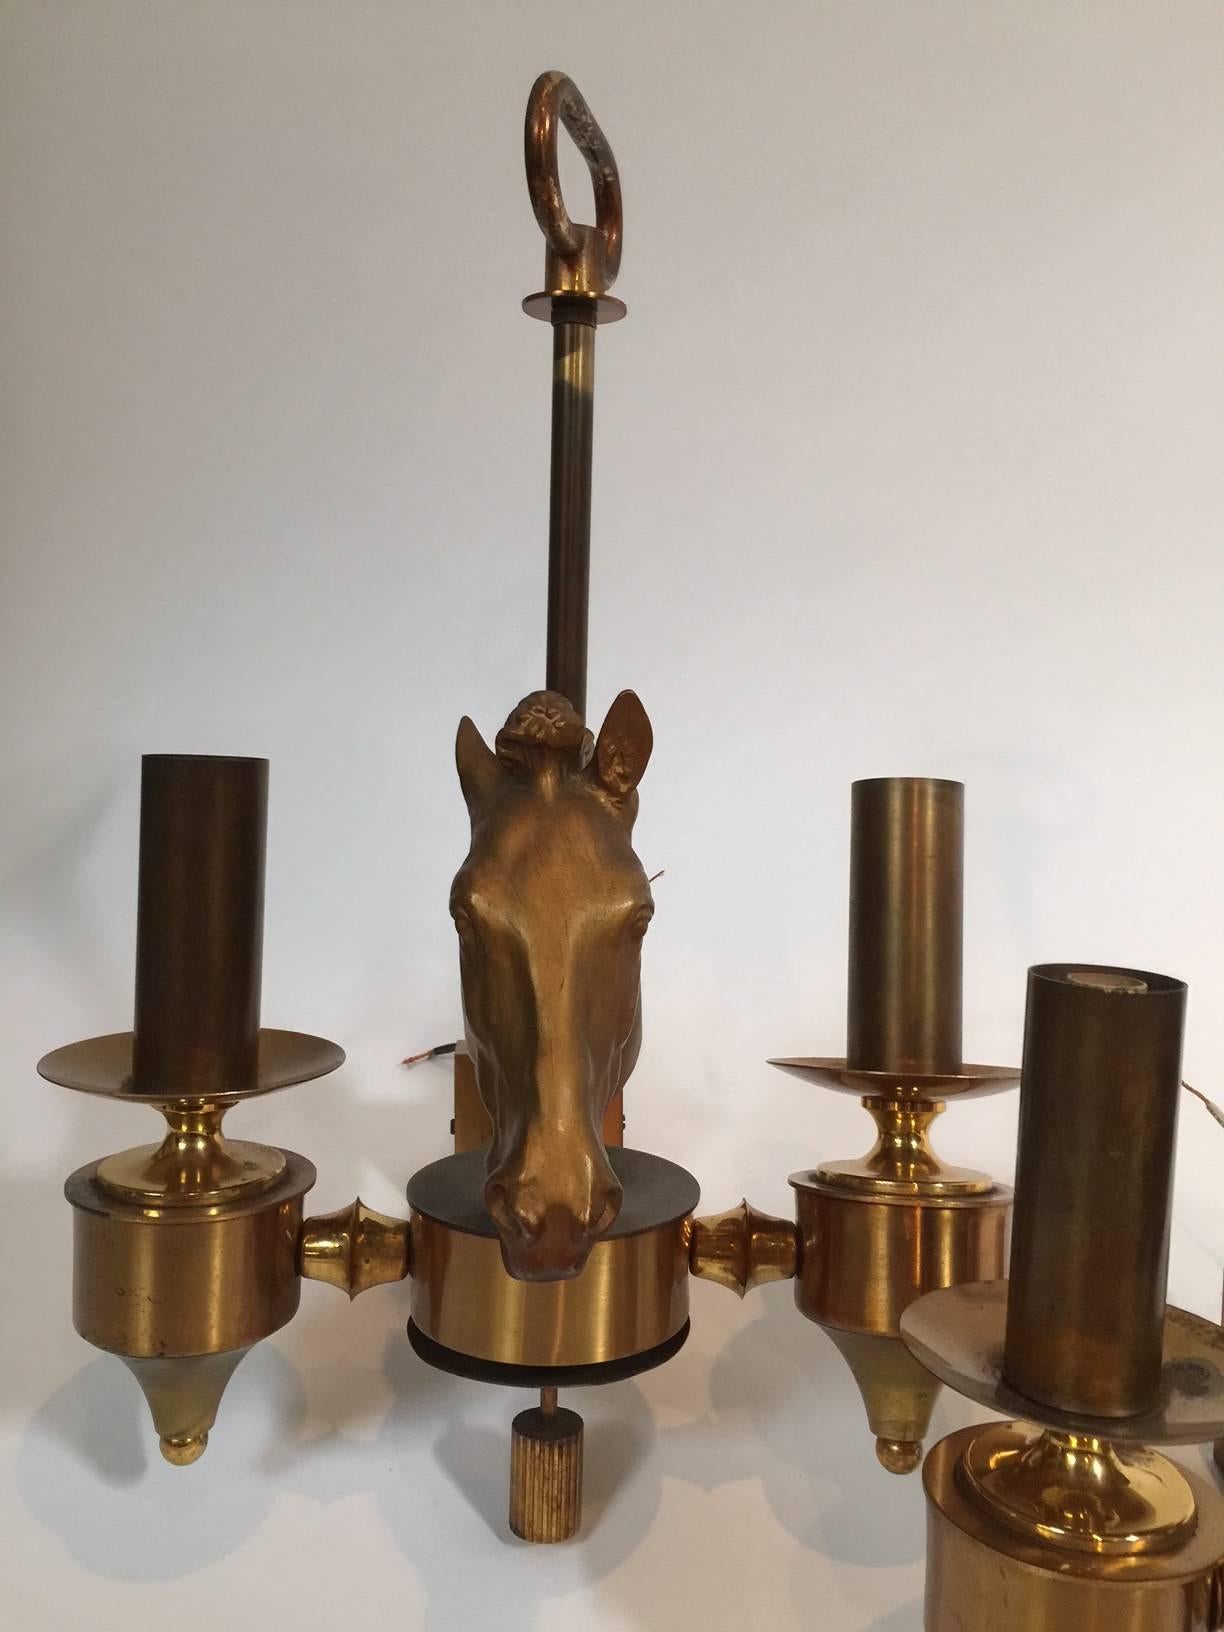 Vintage Maison Charles pair of Cheval sconces from 1940s
Electrified.
 